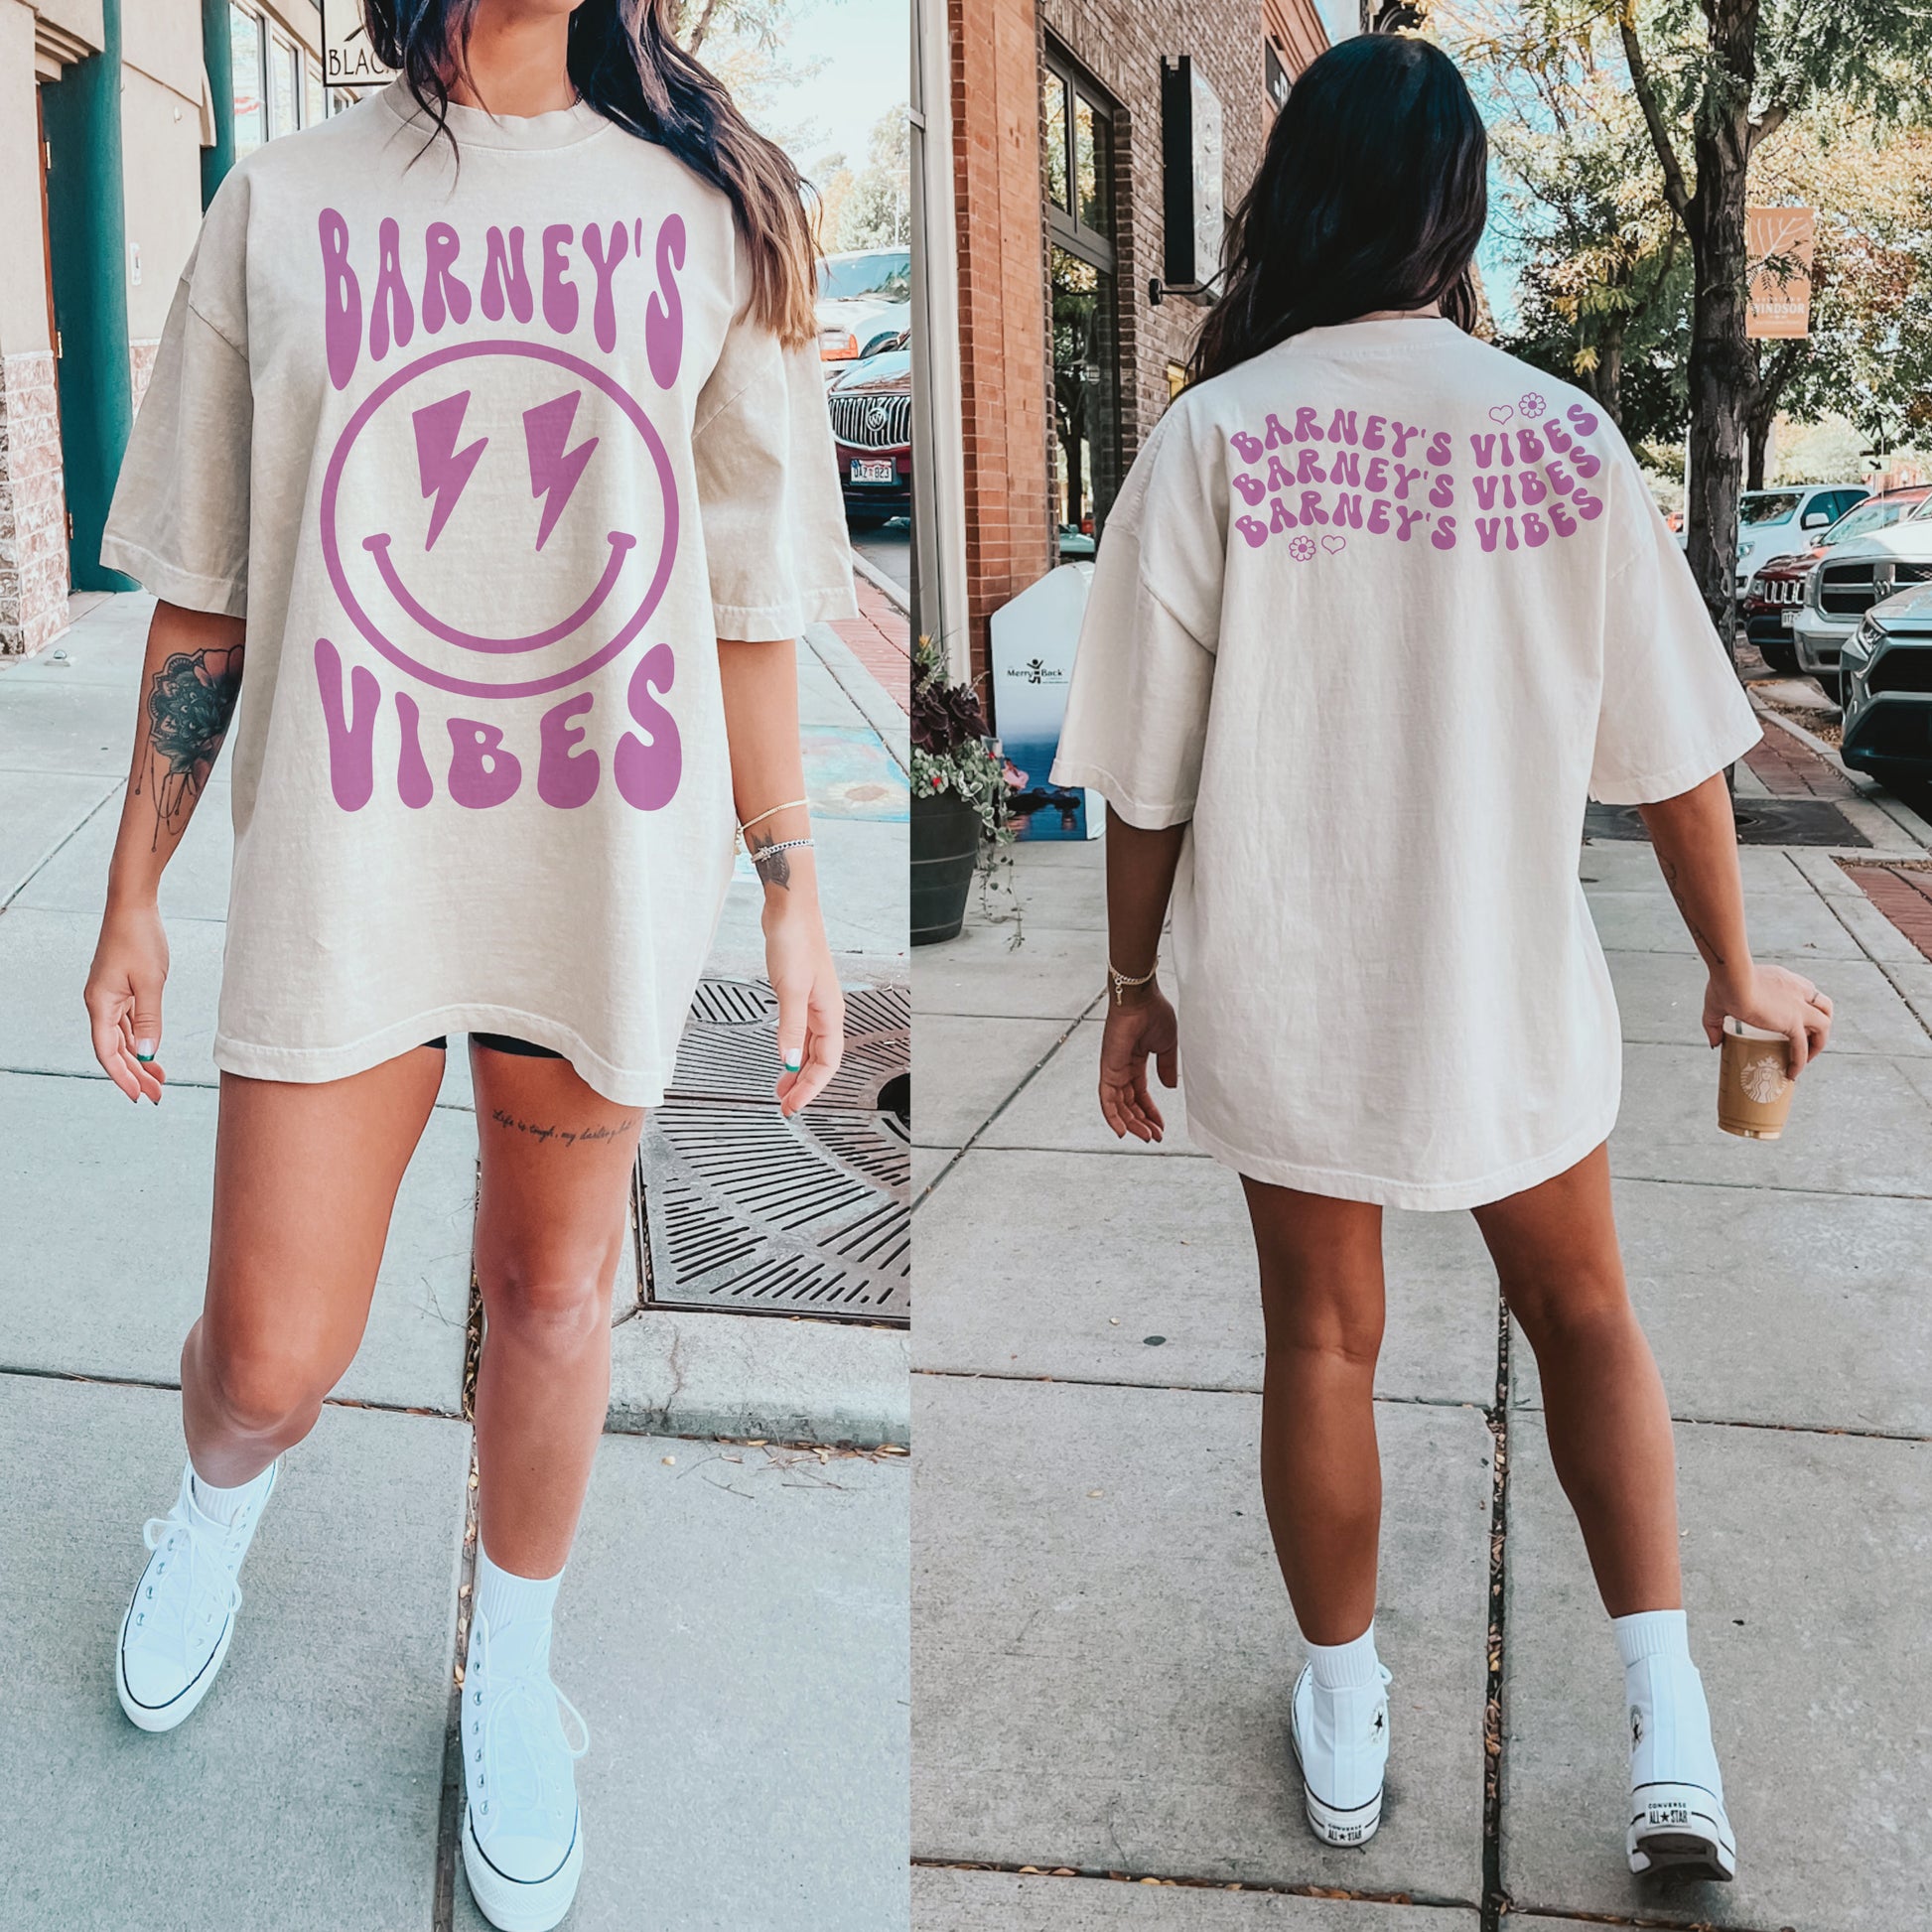 Barney's Vibes | BARNEY'S BEANERY - Women's Smiley Face Tee | Berry Graphics On Ivory T-Shirt, Front And Back View Female Lifestyle Image